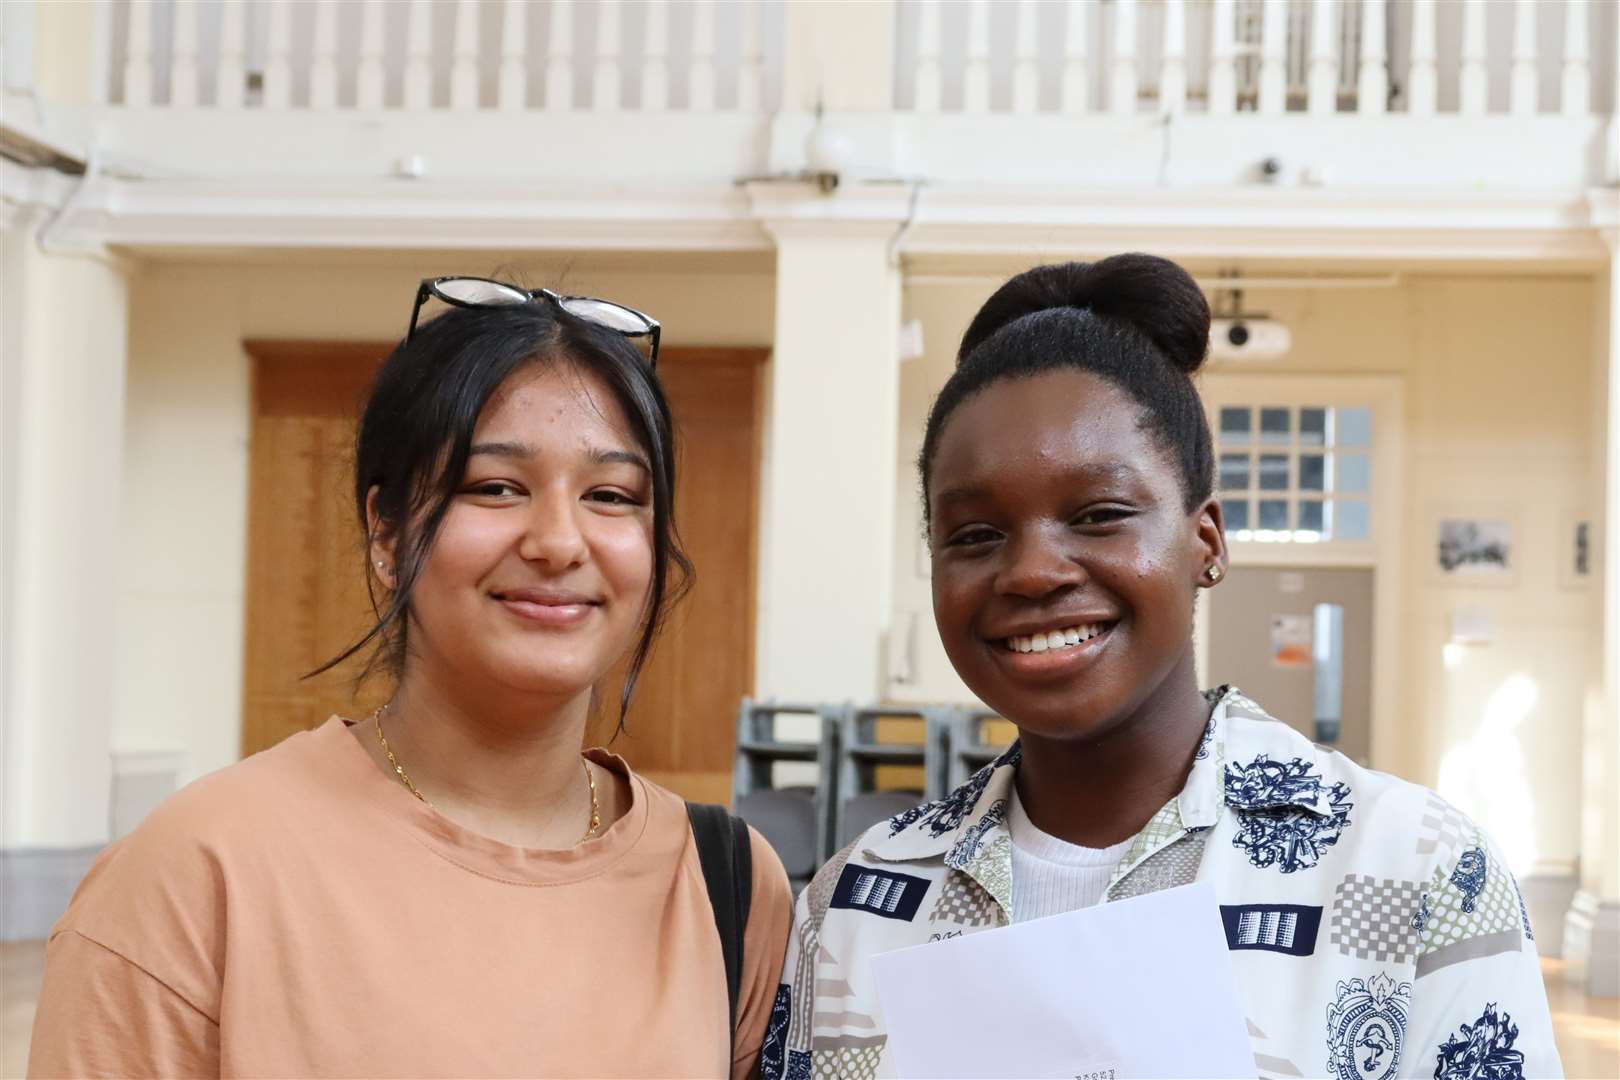 Precious Mintah Baah (right) with a big smile on GCSE results day